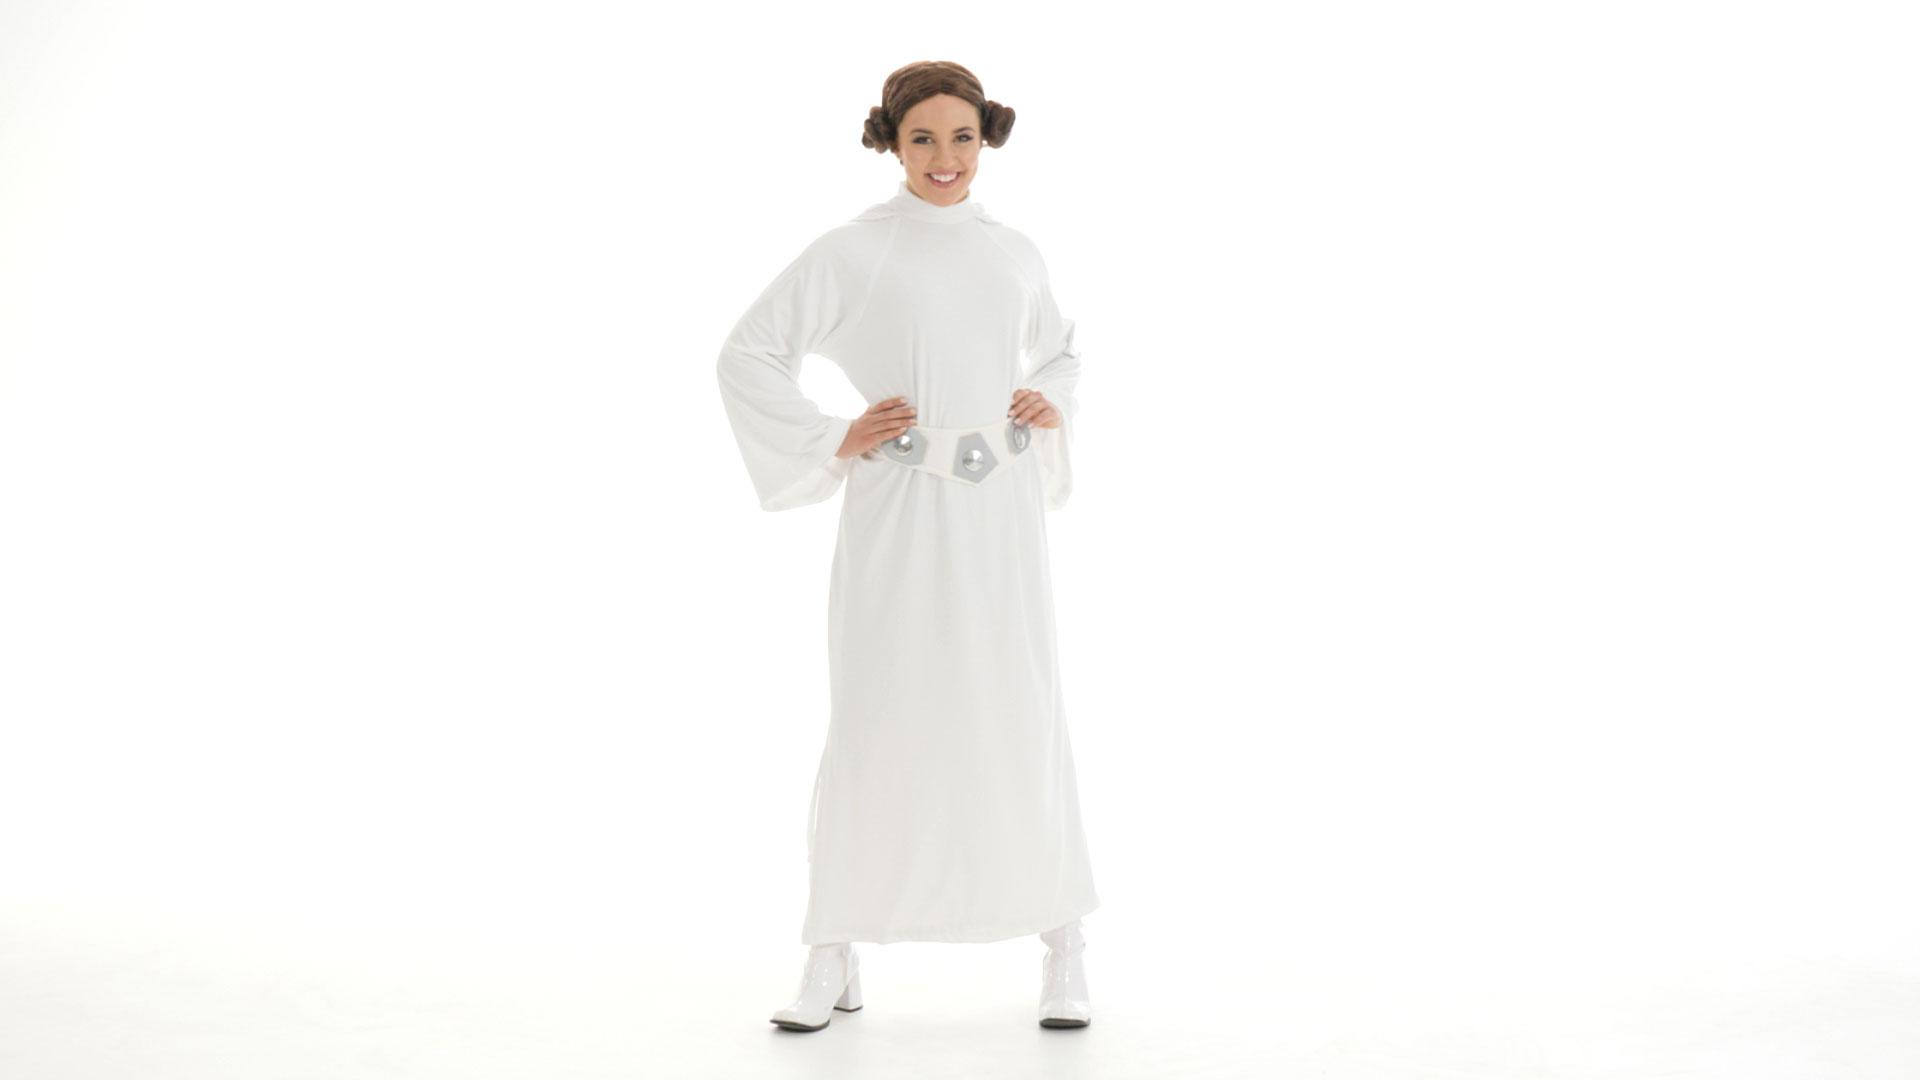 This Deluxe Adult Princess Leia Costume for women is a great Star Wars character costume from the original trilogy.